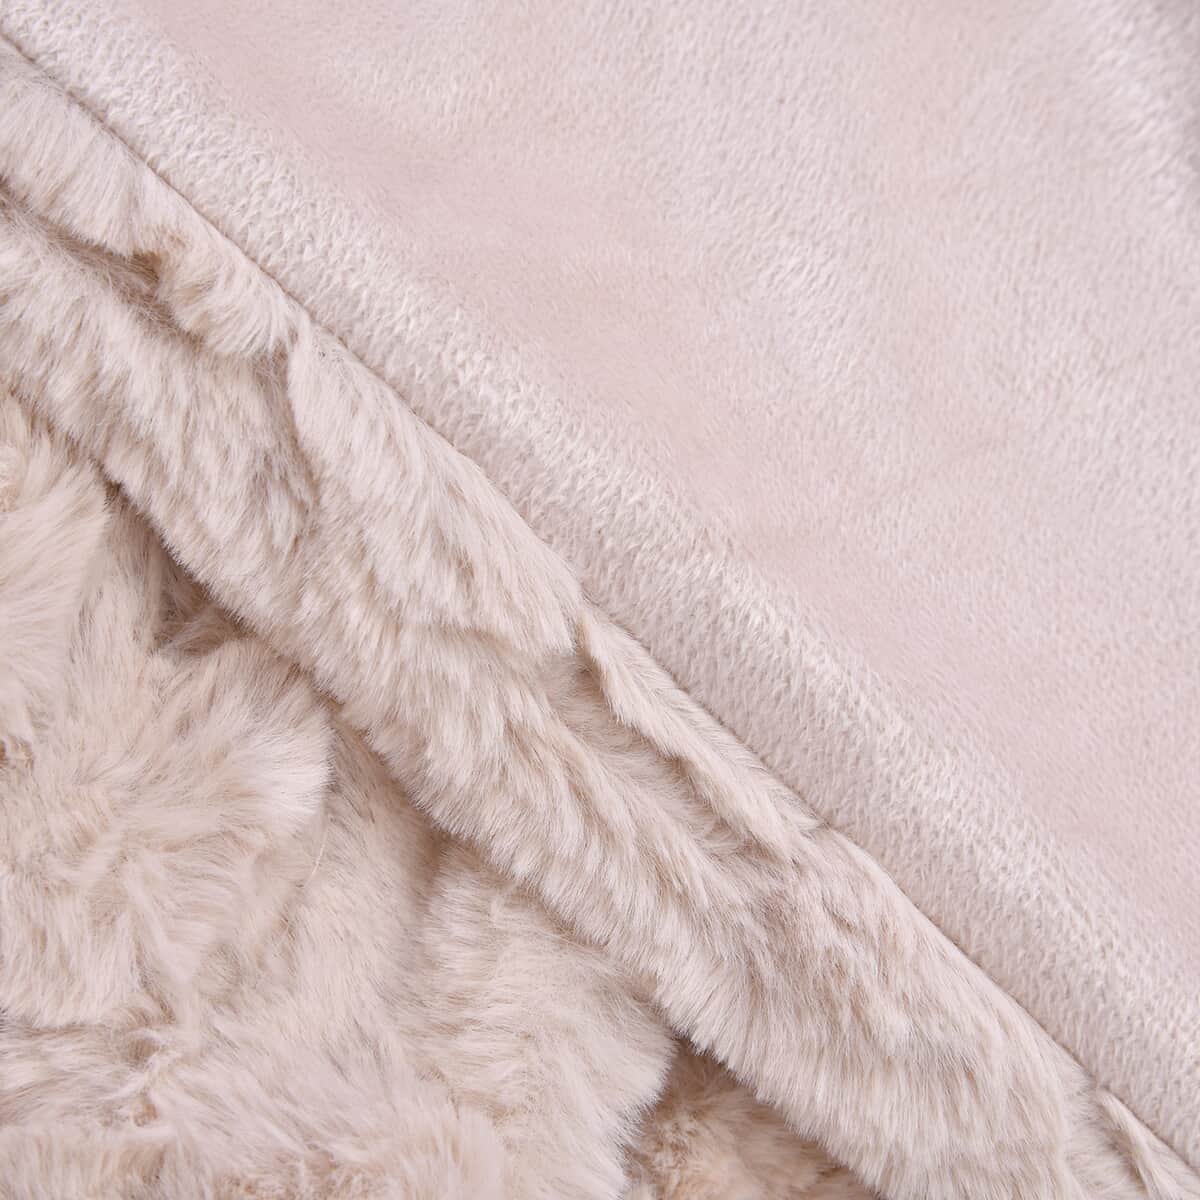 HOMESMART Off White Faux Rabbit Fur Throw (60"x80") image number 5